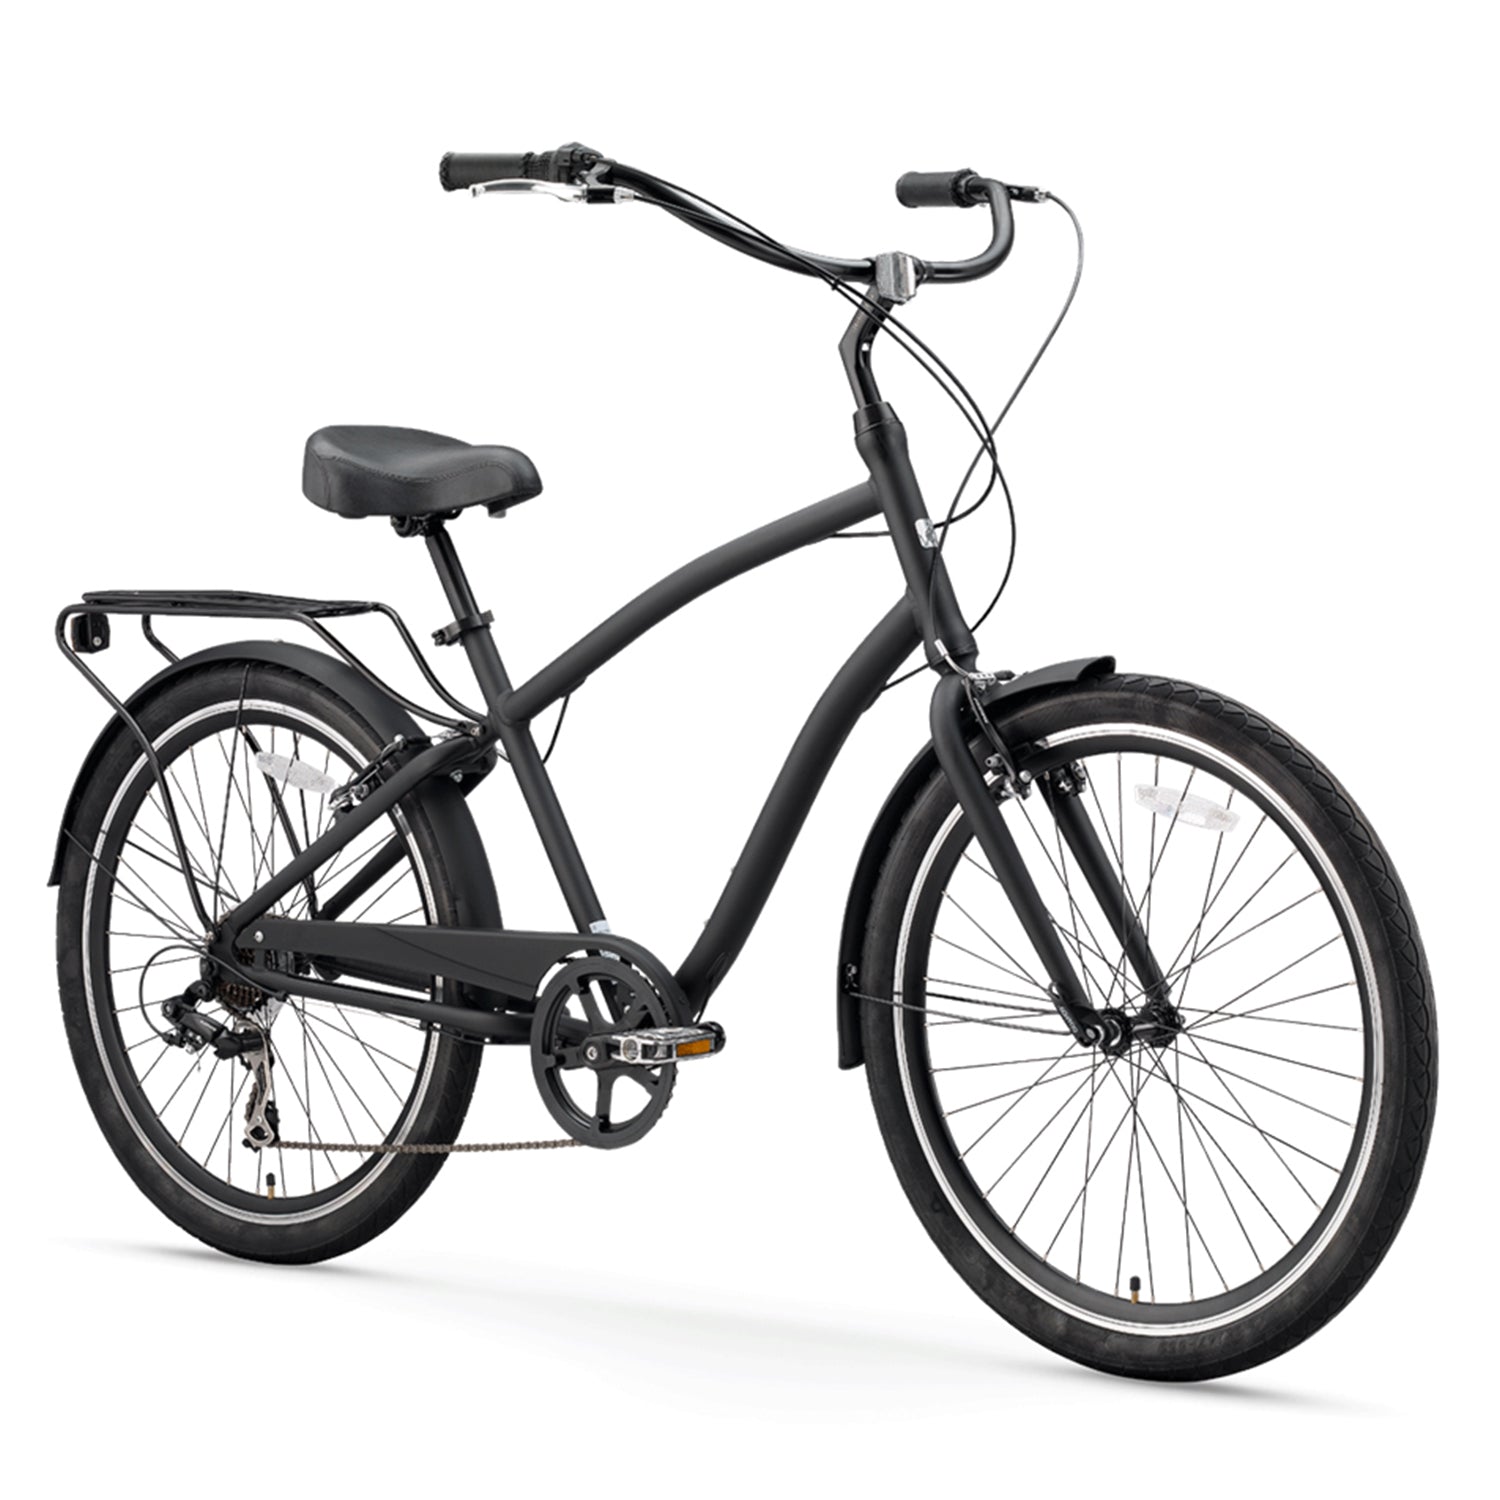 What 7-Speed Bike Do You Recommend?